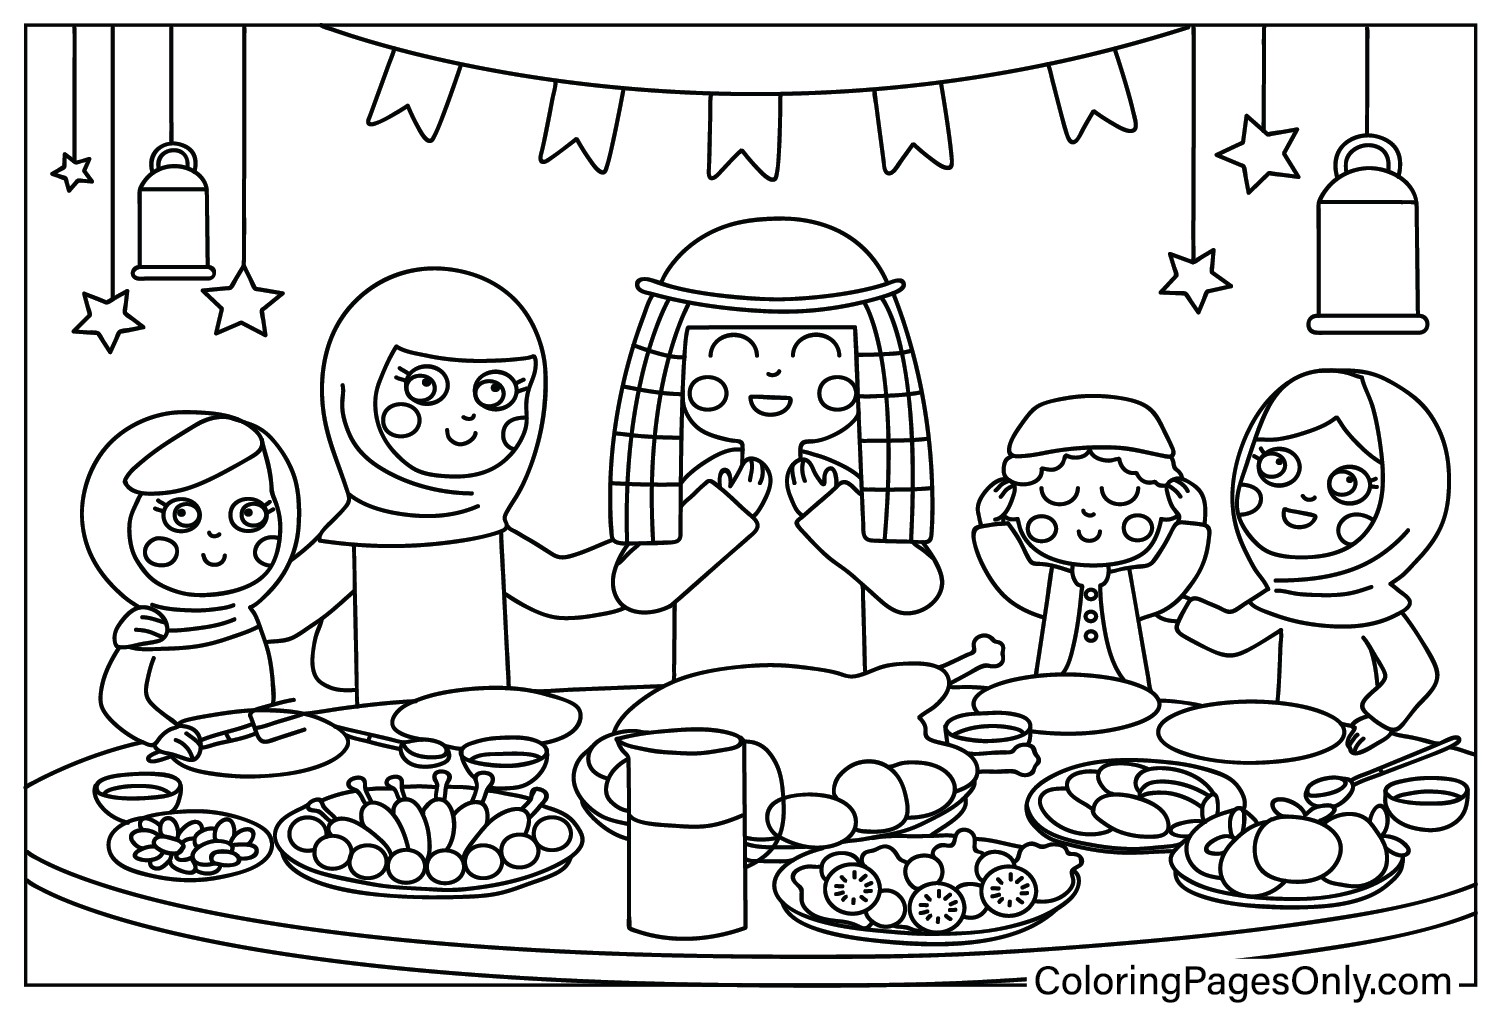 Food Palestine Coloring Pages from Palestine